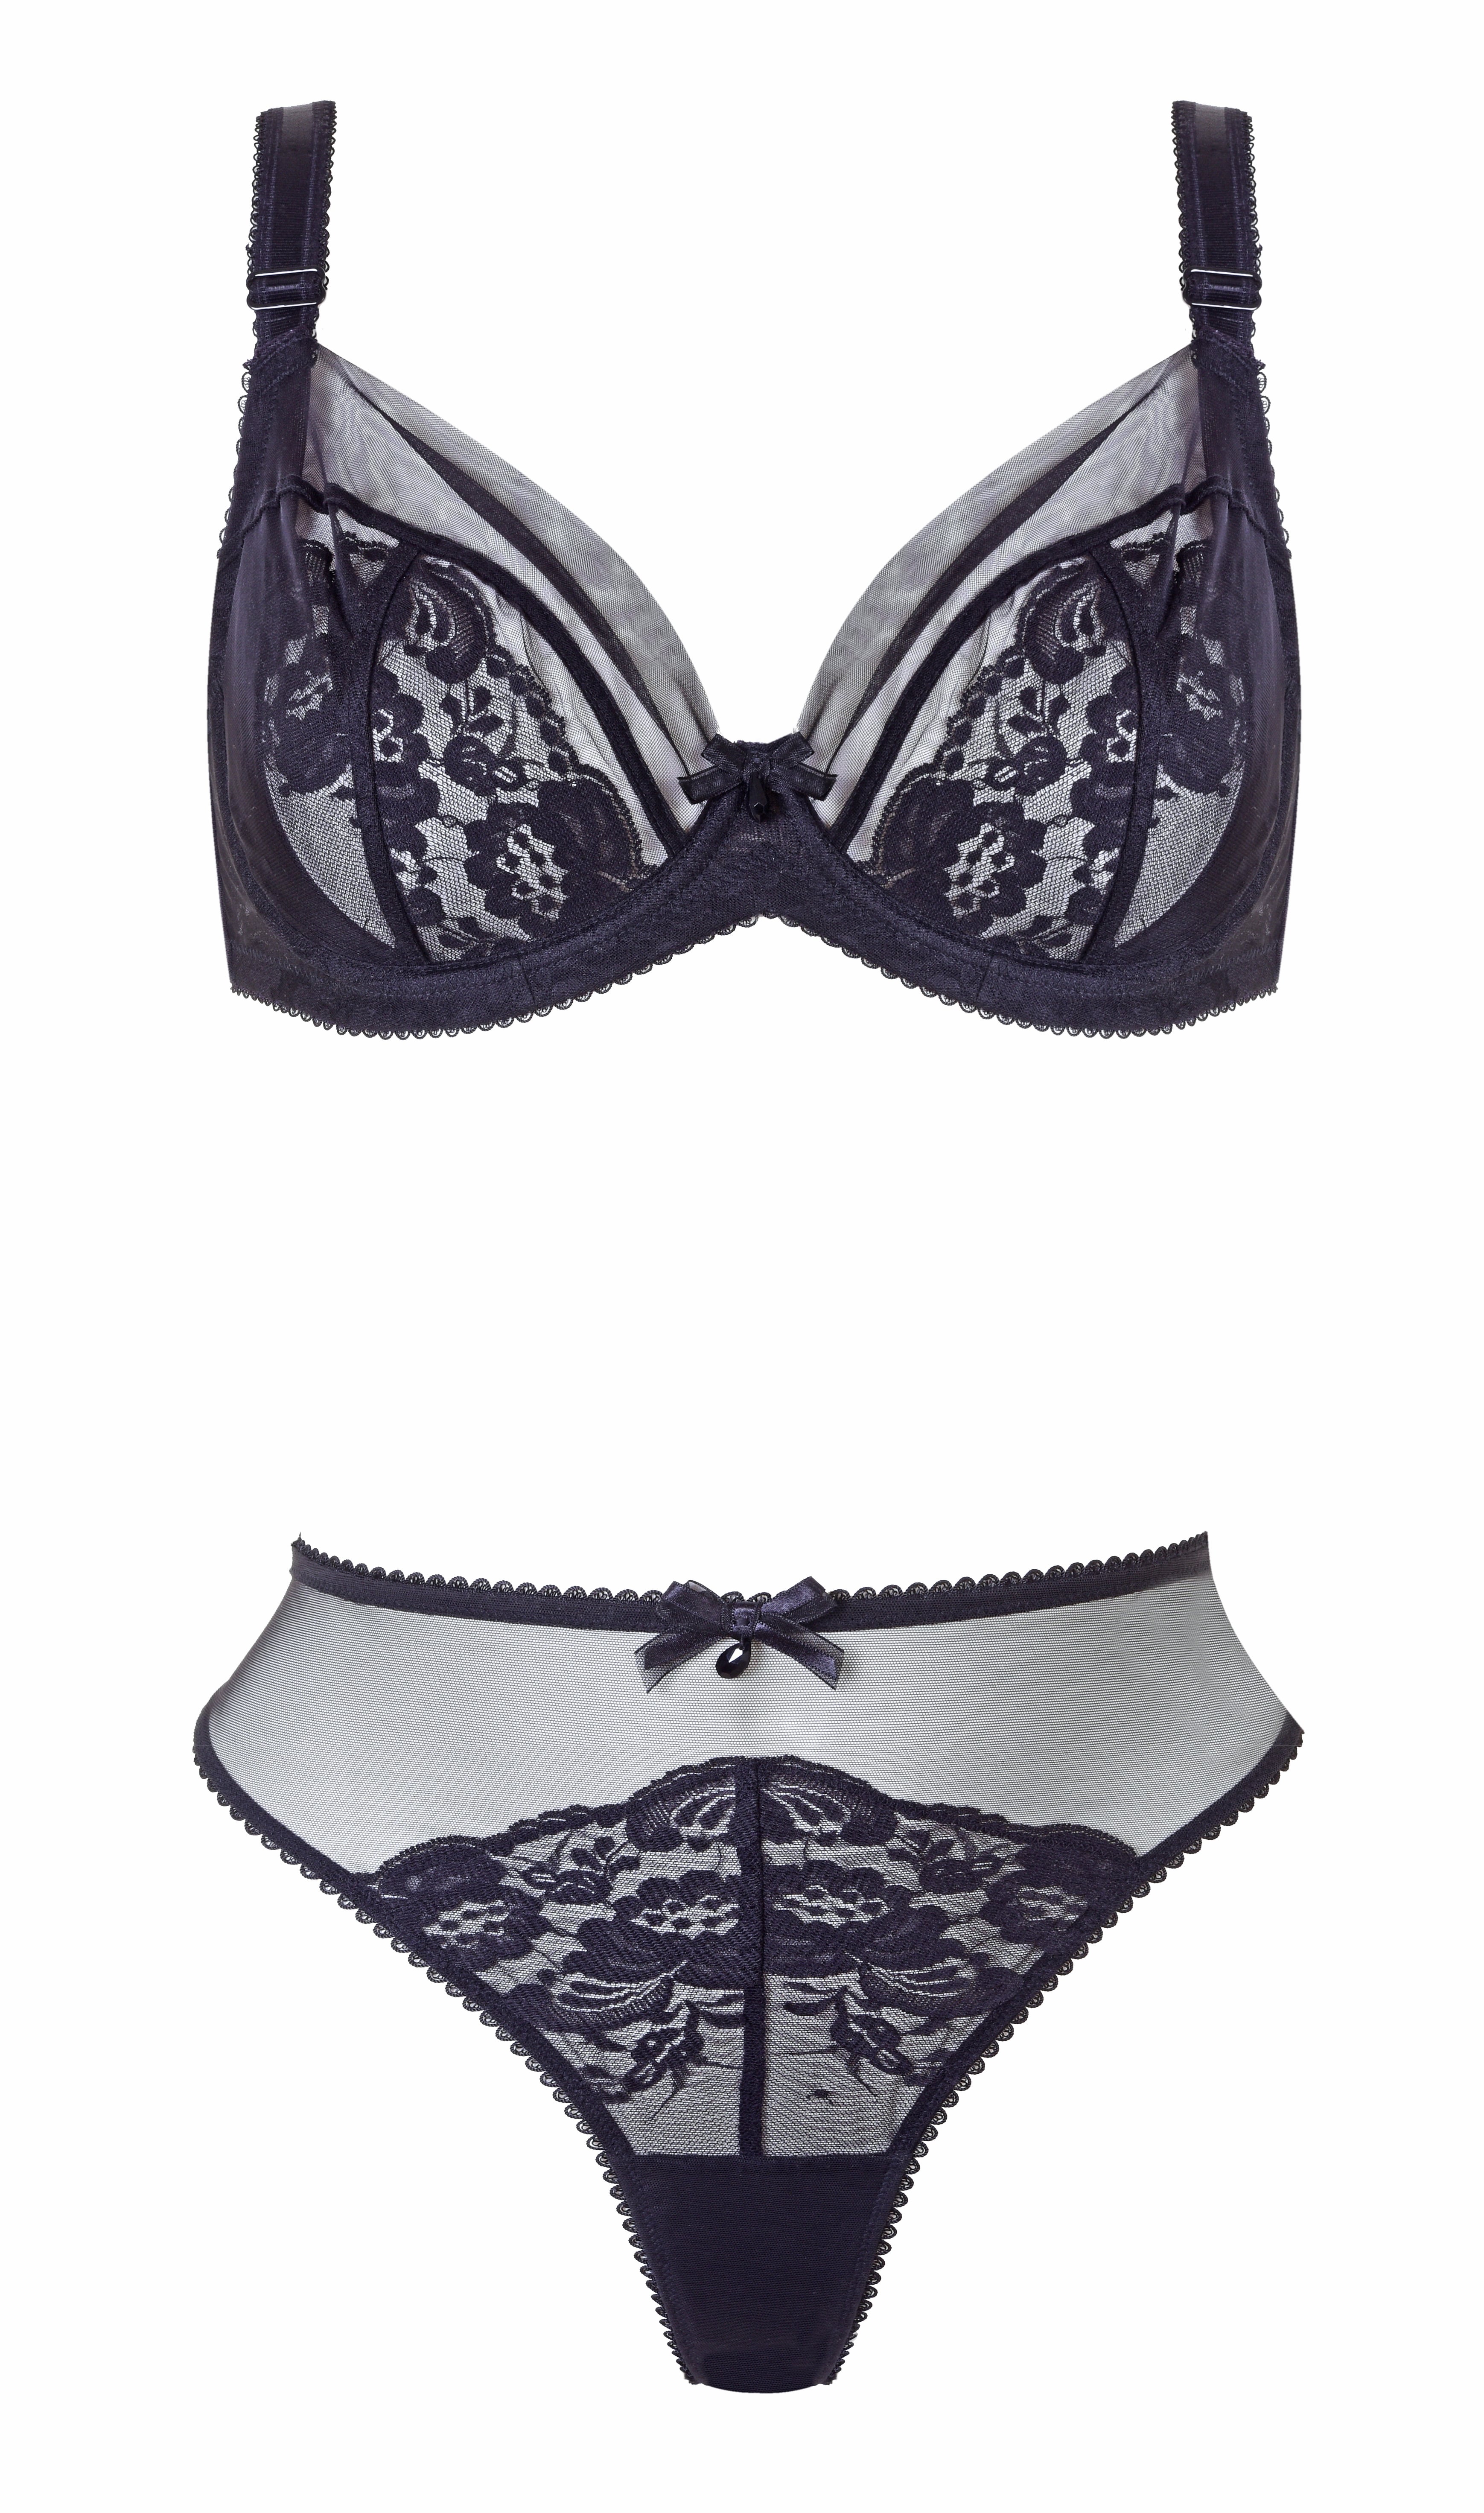 Debenhams.com - Introducing the faces of our lingerie